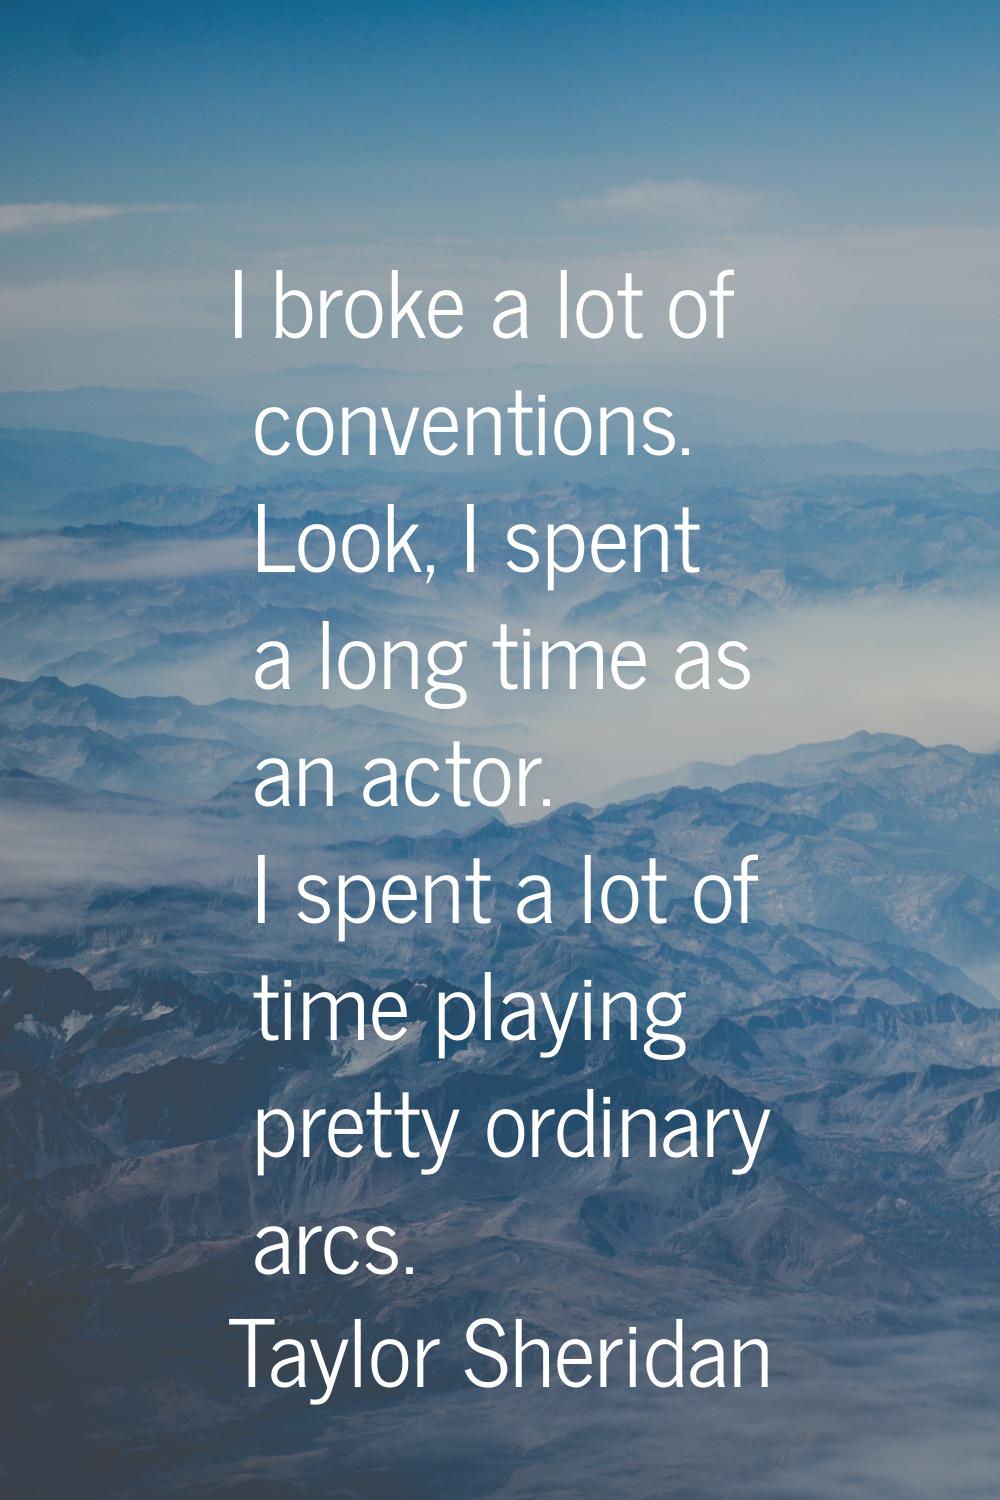 I broke a lot of conventions. Look, I spent a long time as an actor. I spent a lot of time playing 